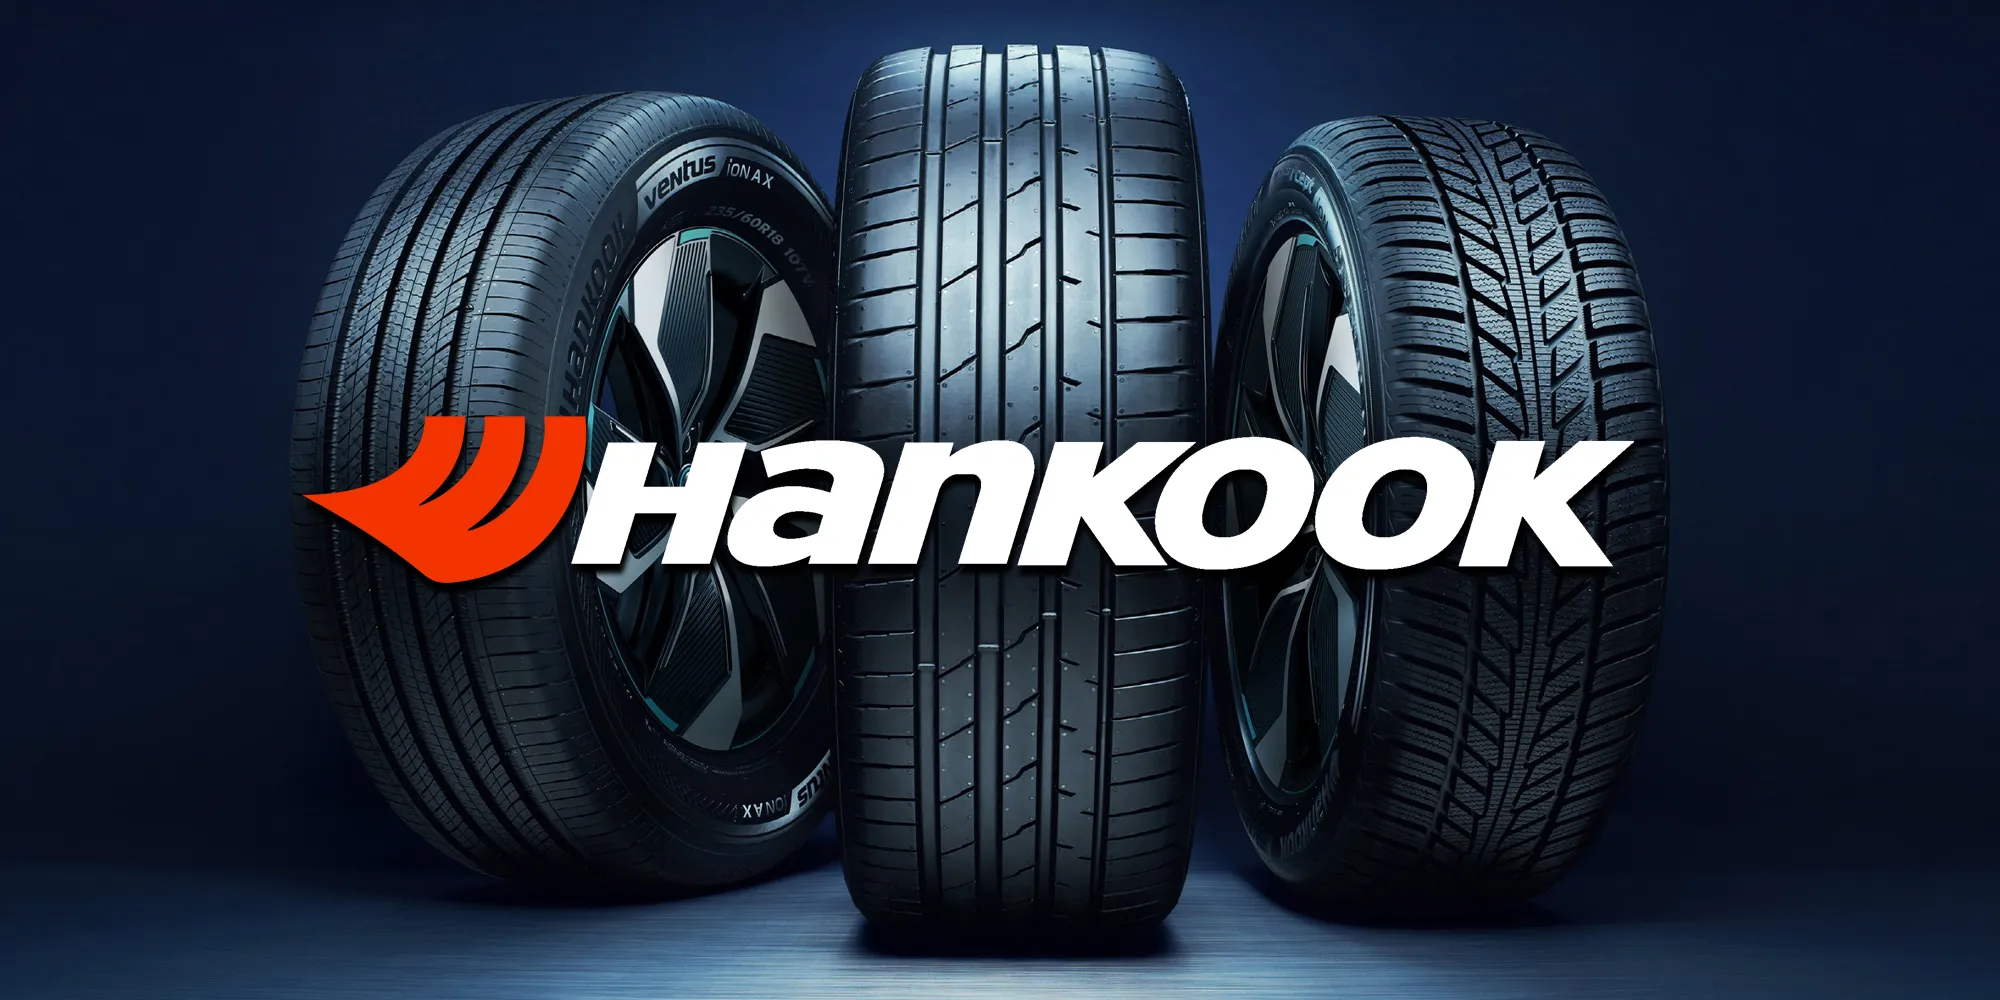 Megatyre is located in Browns Bay on Auckland's North Shore and offers an extensive range of tyres for your vehicle.  We specialise in hankook tyres. Megatyre can supply and fit towbars for almost any vehicle. We also offer a wheel alignment service.